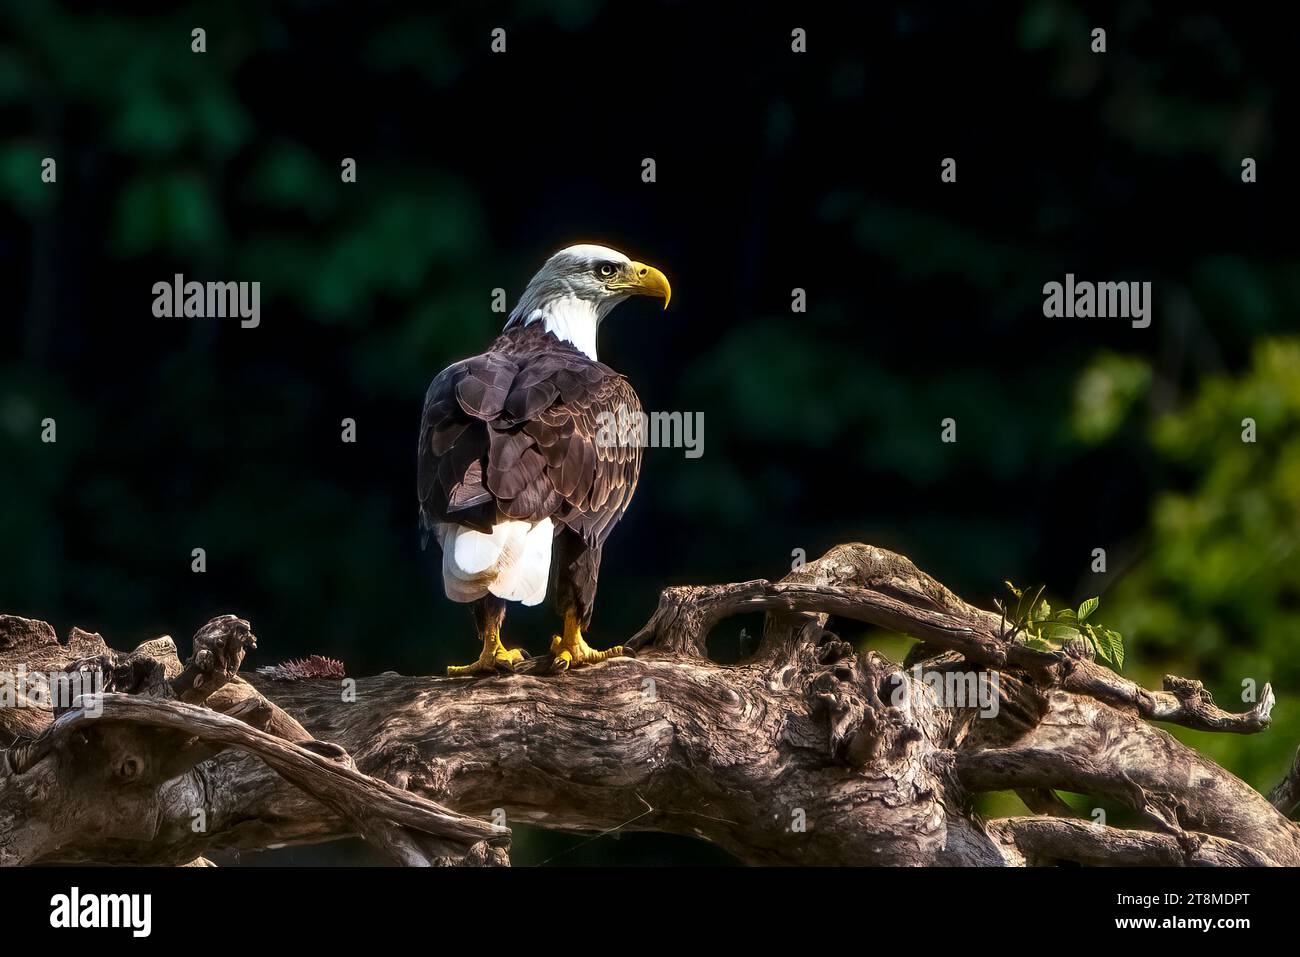 Perched on a mid-river fallen tree, a bald eagle surveys the scene. Stock Photo